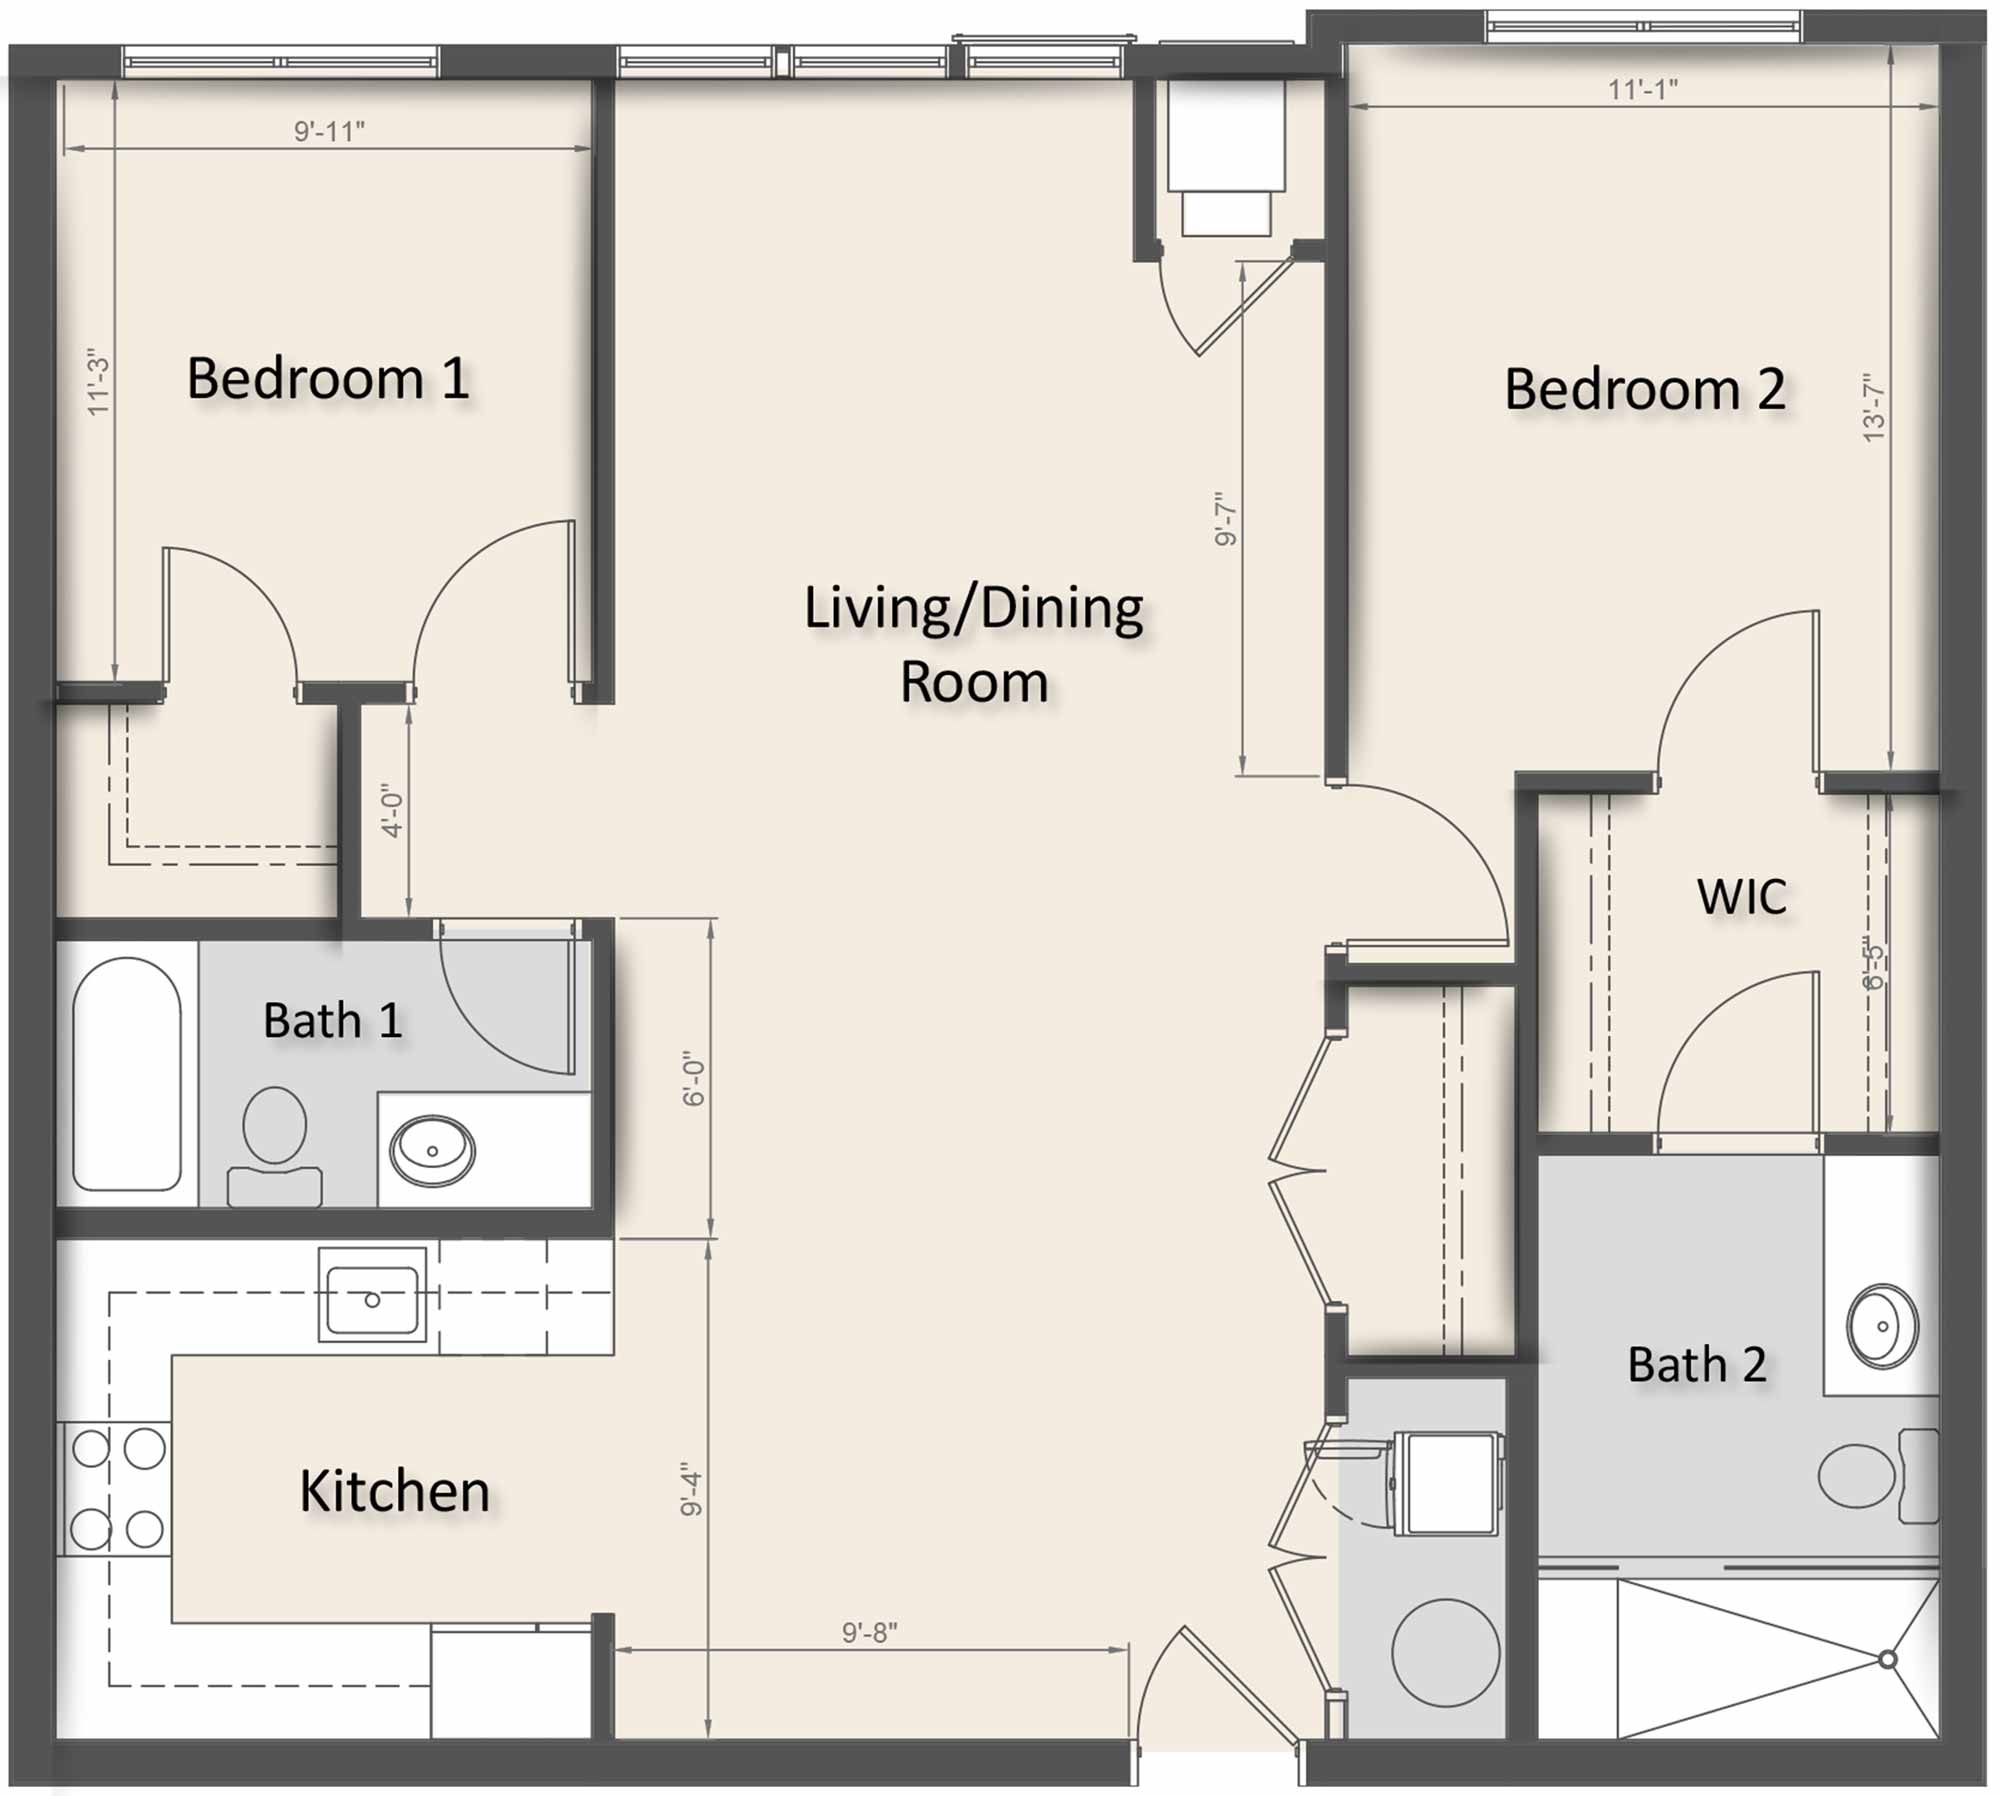 TYPE "T" - TWO BEDROOM (1,098 SF)